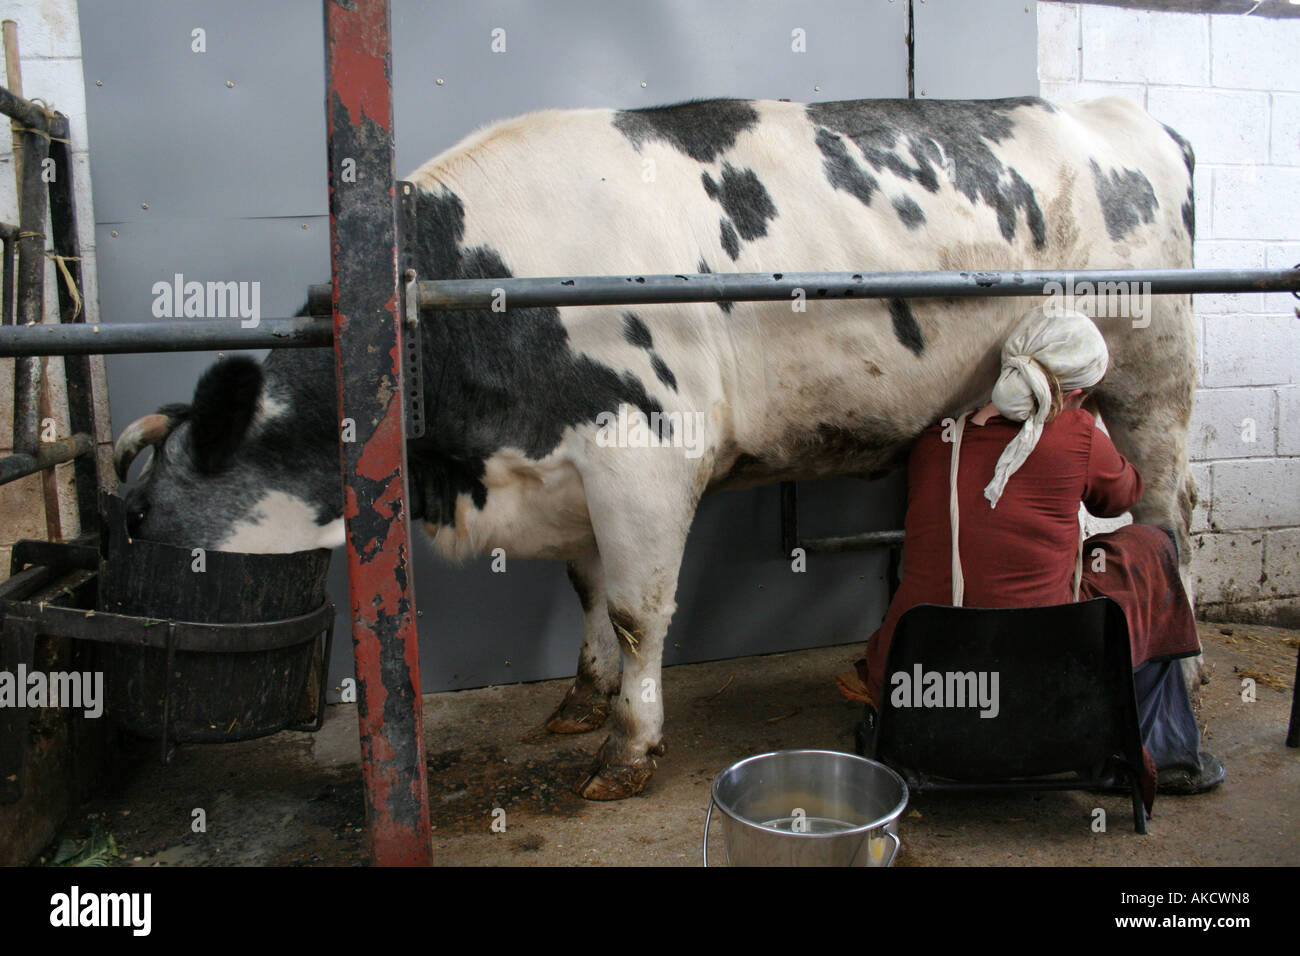 Woman milking a cow at a temple in North London Stock Photo